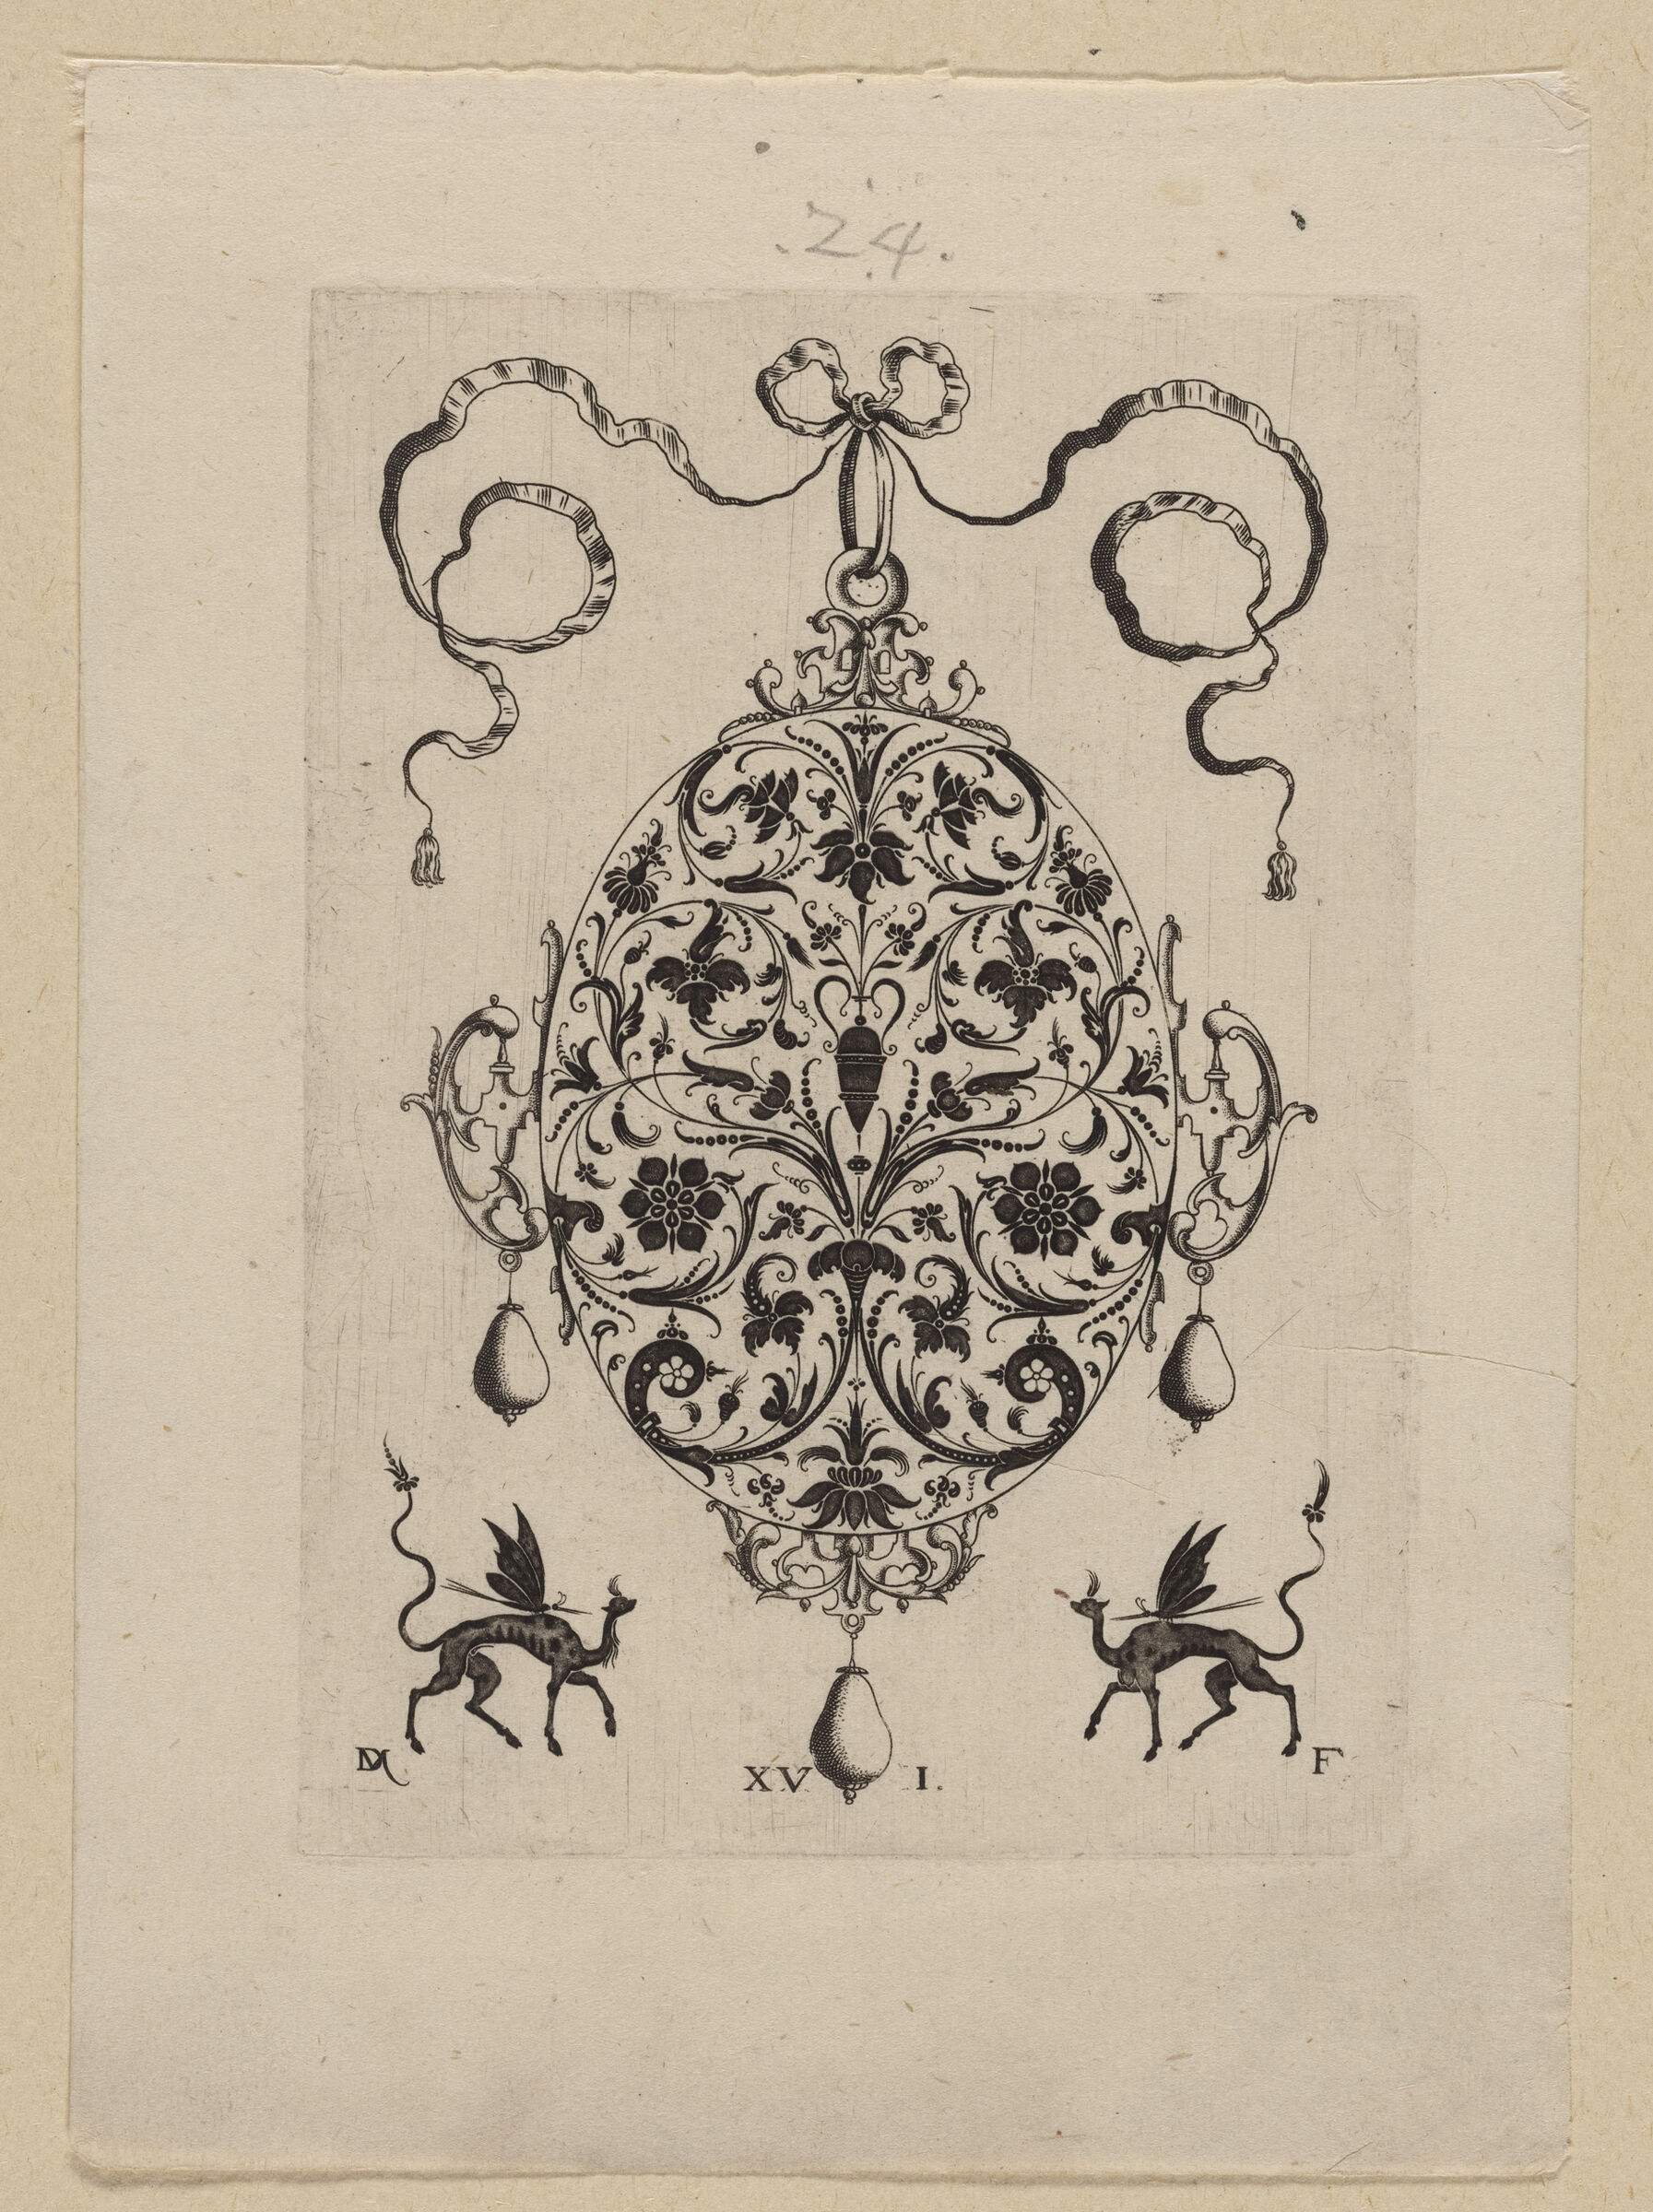 Pendant With Blooming Foliate Scrollwork Centered By A Vase, Monsters, Insects, And Three Pendant Pearls Below